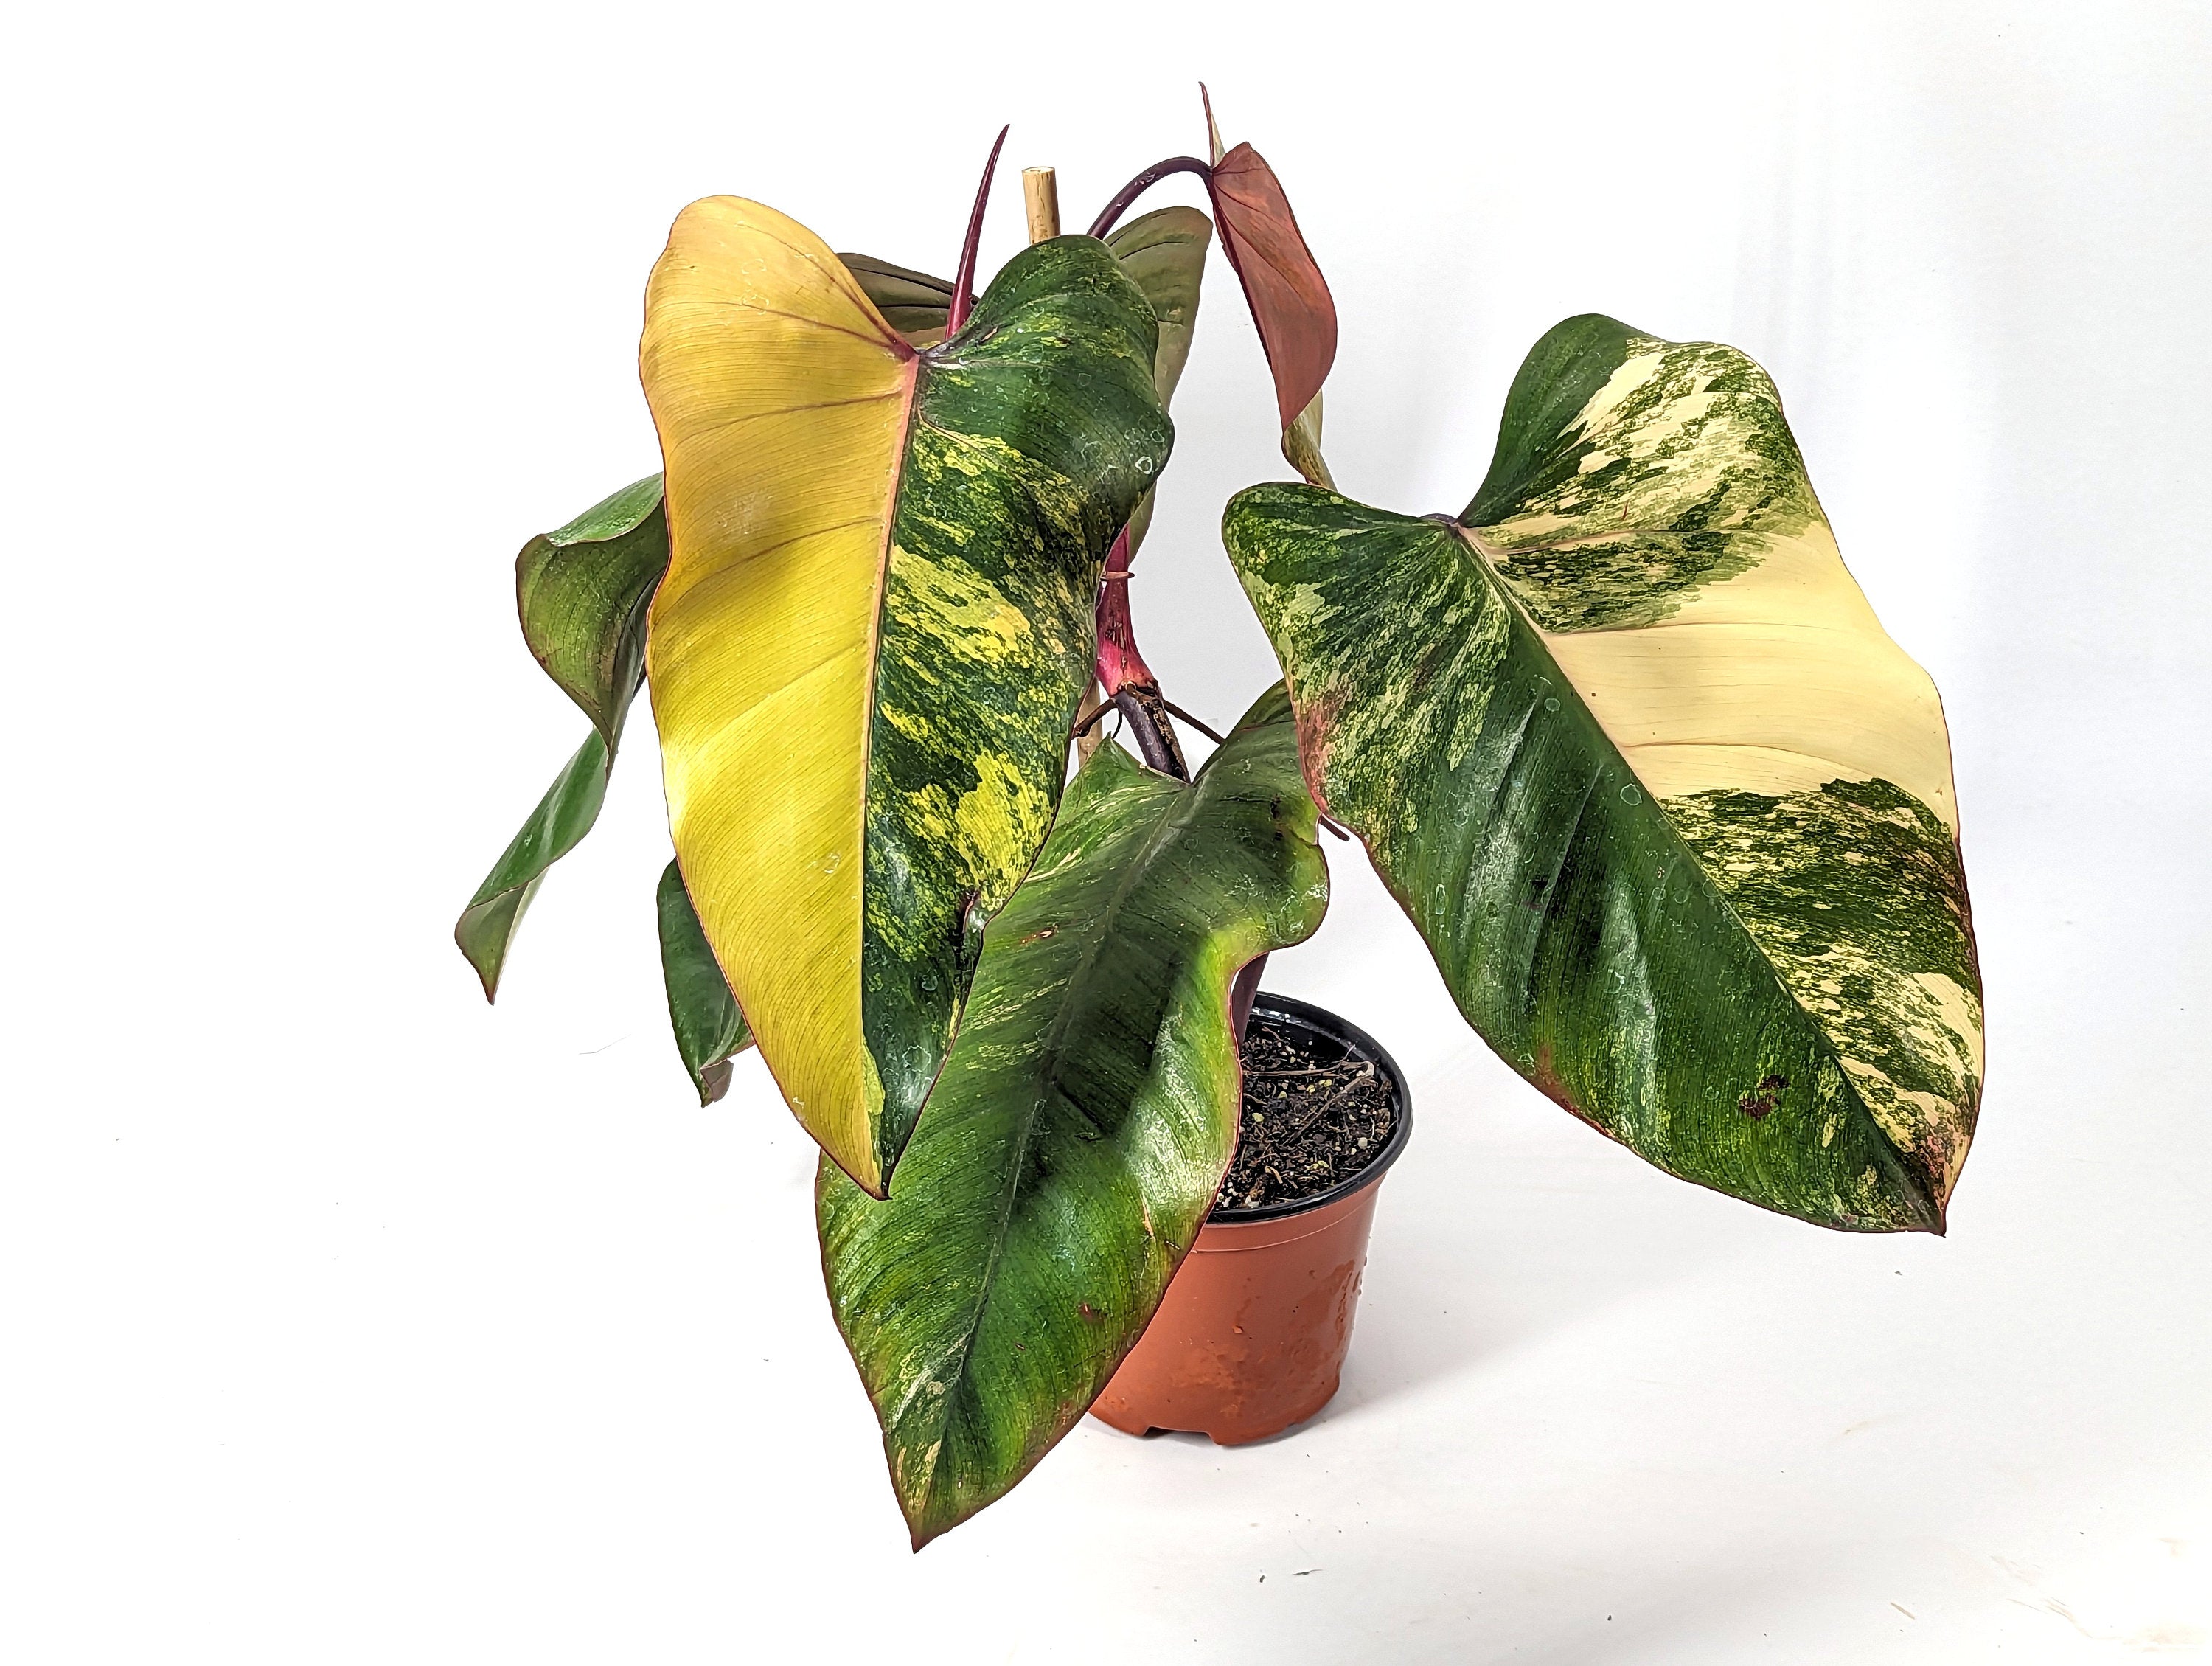 HALF MOON Strawberry Shake Philodendron Yellow Leaf 6 inch Pot - Exact Plant Pictured One Of a Kind Amazing Color